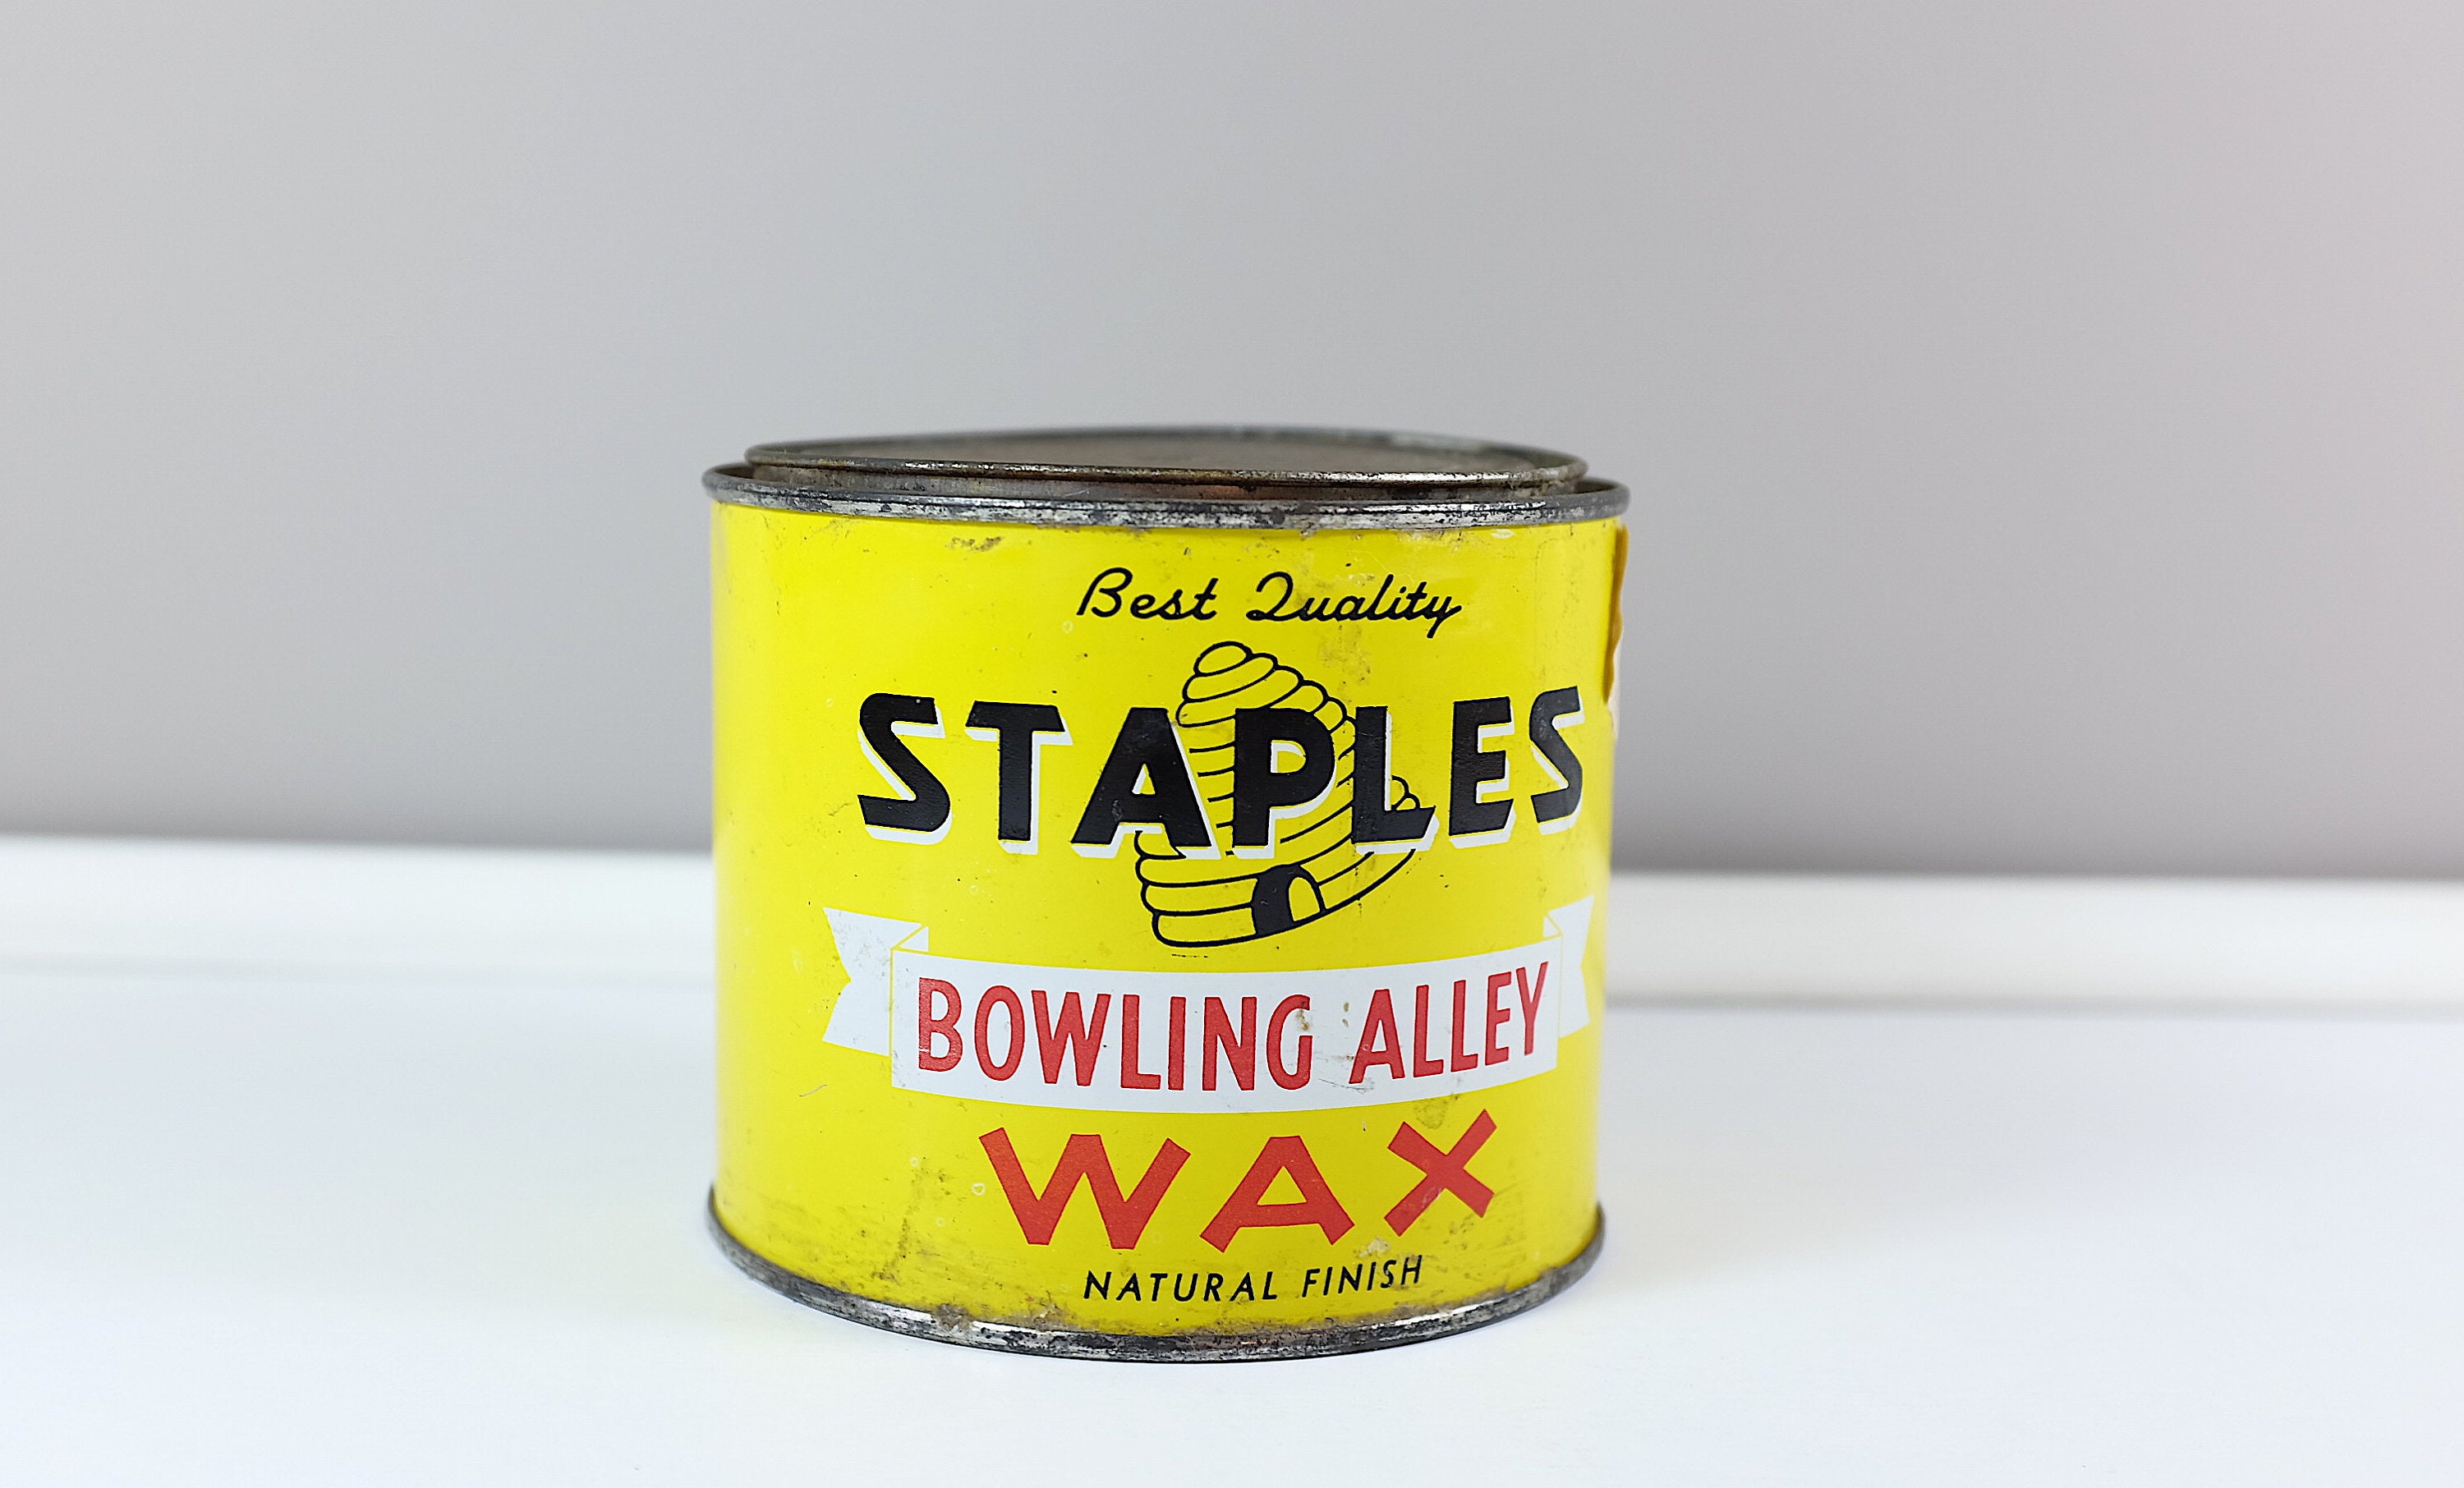 Vintage HF Staples Bowling Alley Wax Tin New Old Stock 2 LB Tin